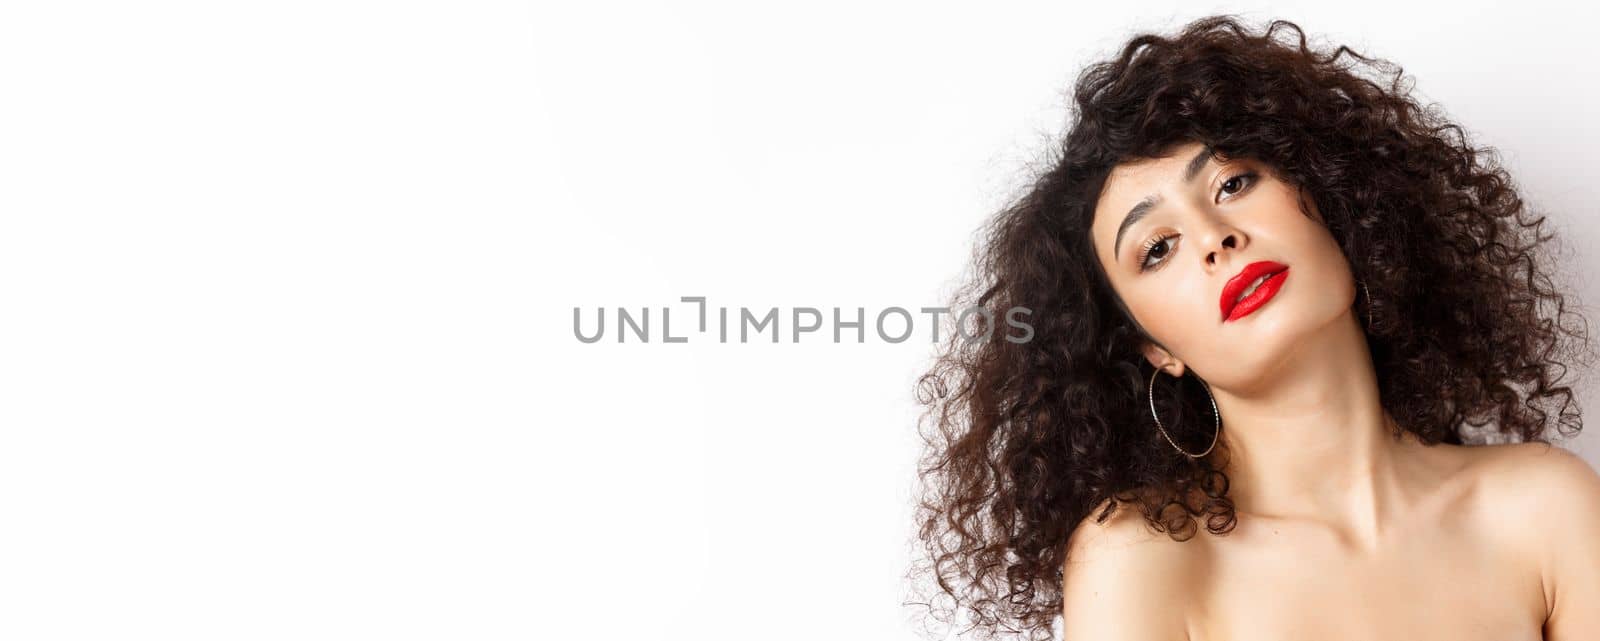 Close-up portrait of sensual and romantic woman with curly hair, red lips, looking seductive at camera, posing on white background.